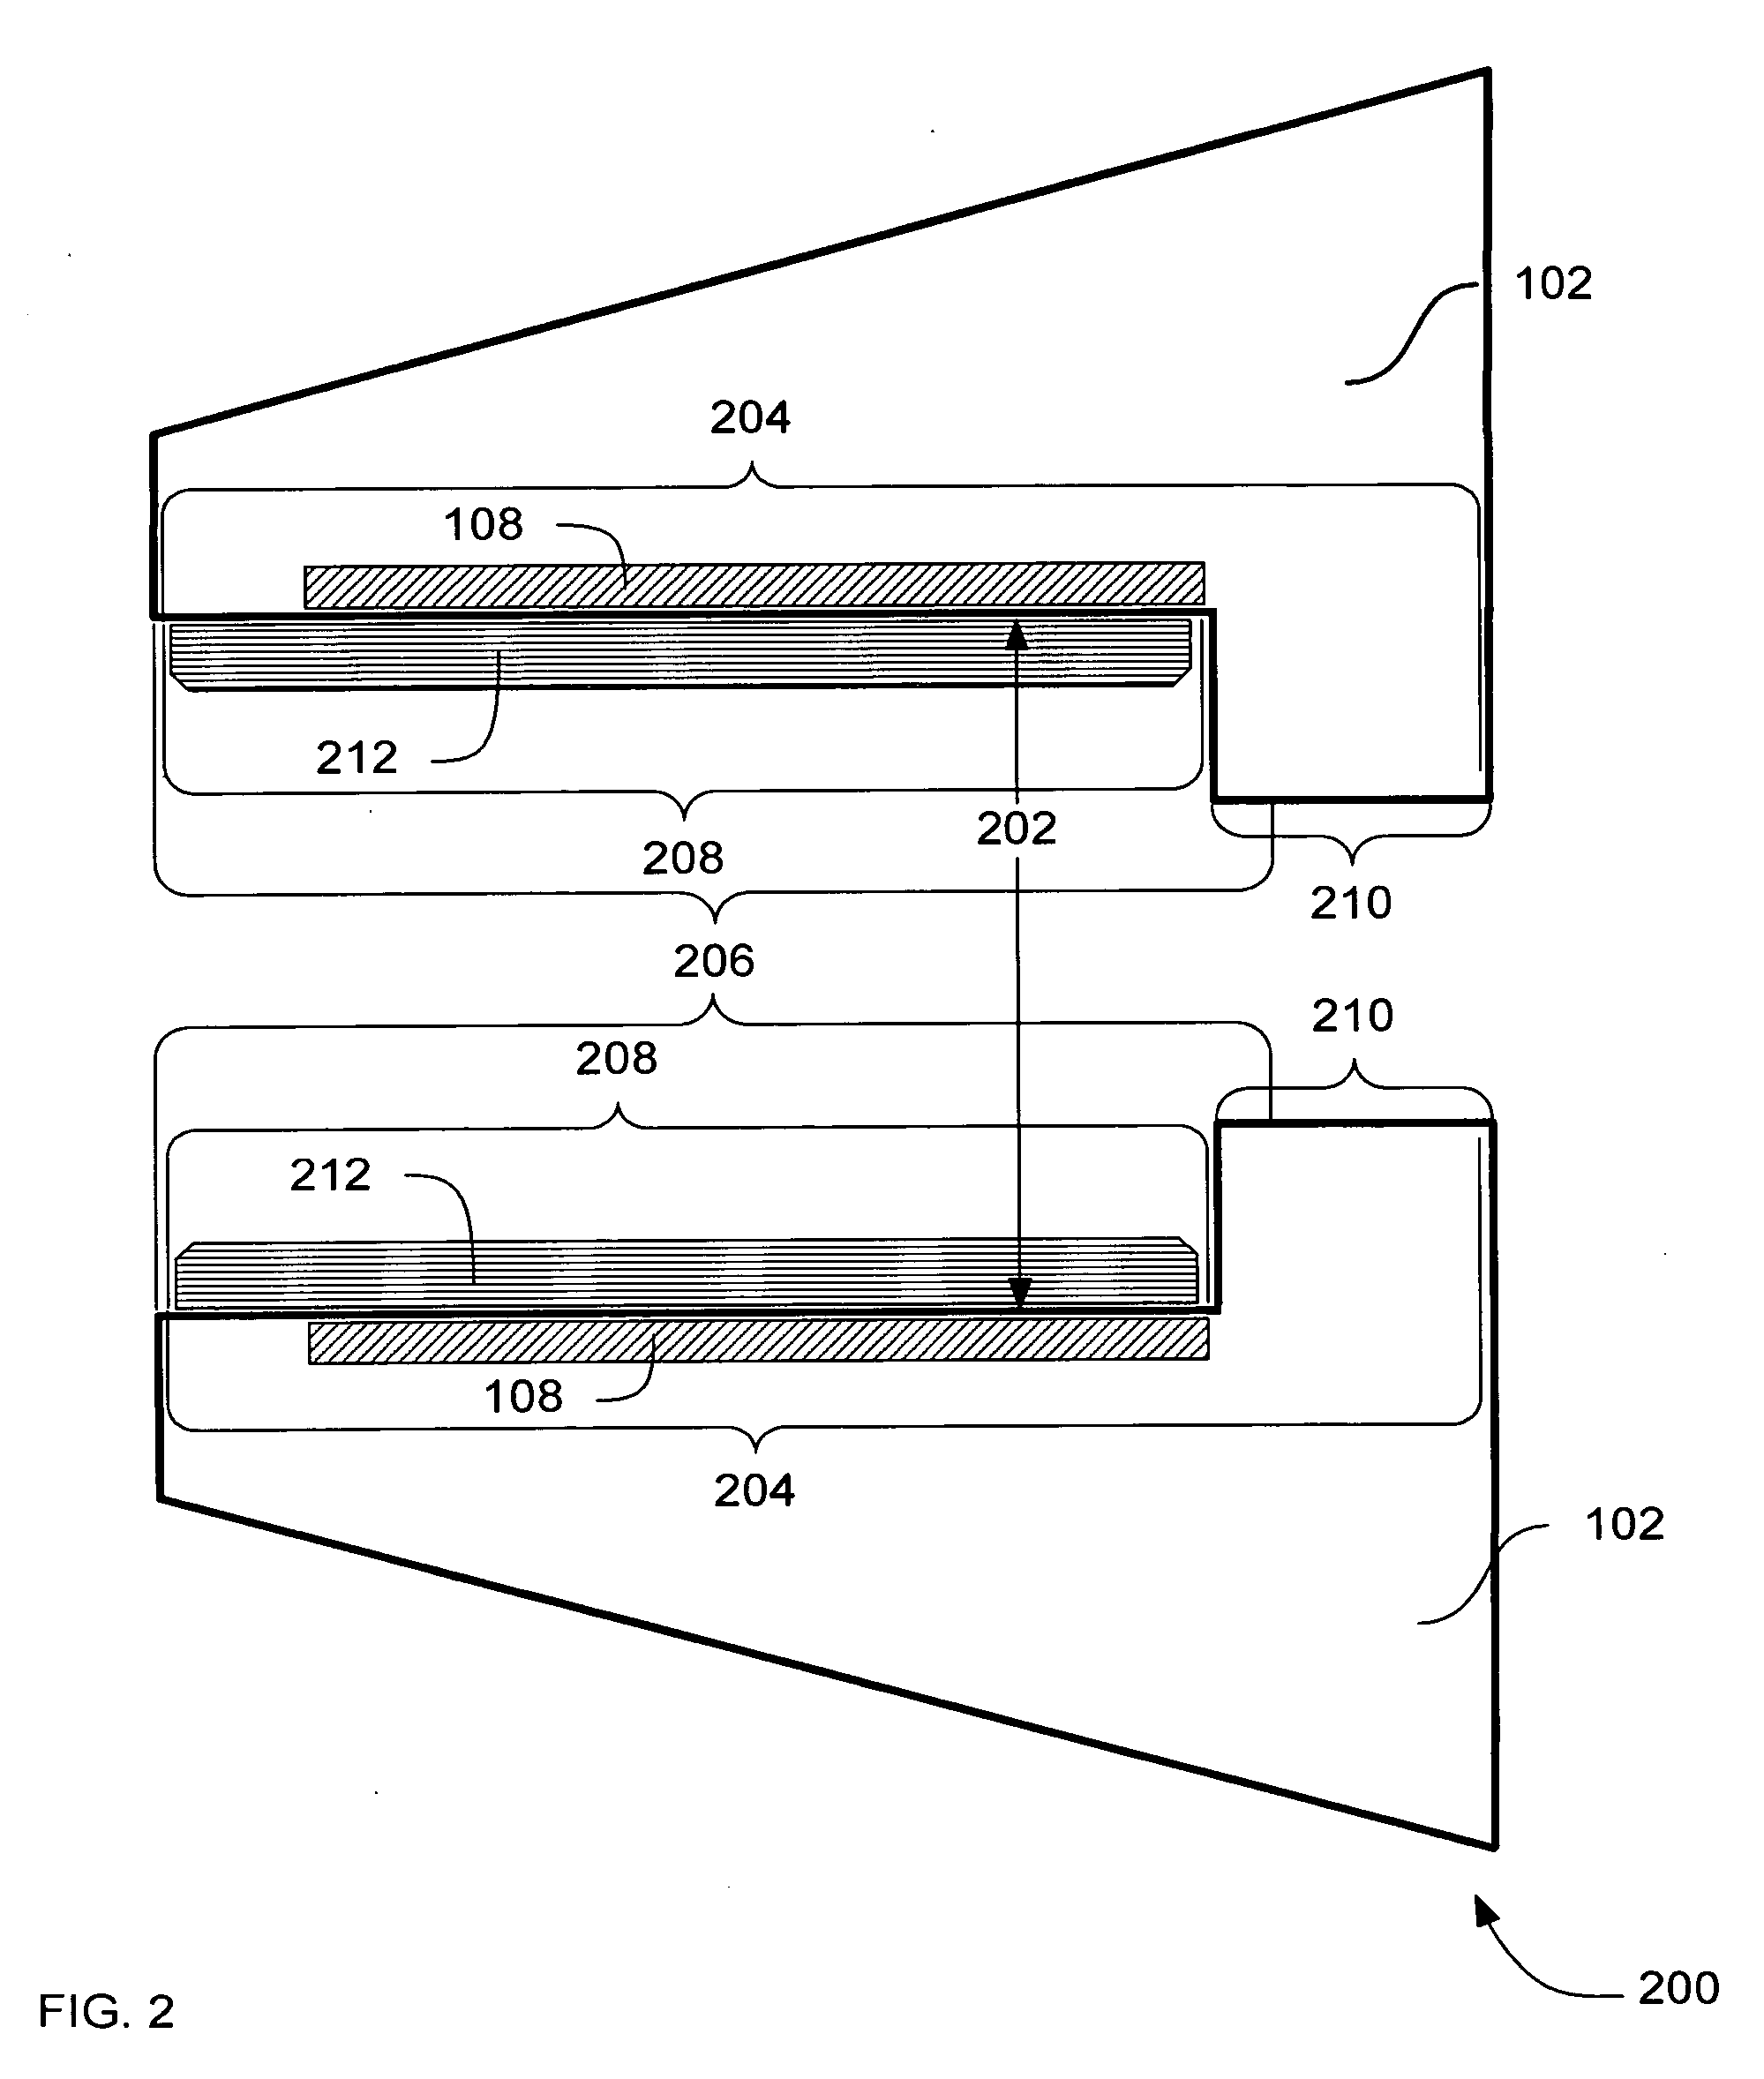 Systems, methods and apparatus of a magnetic resonance imaging magnet to produce an asymmetrical stray field